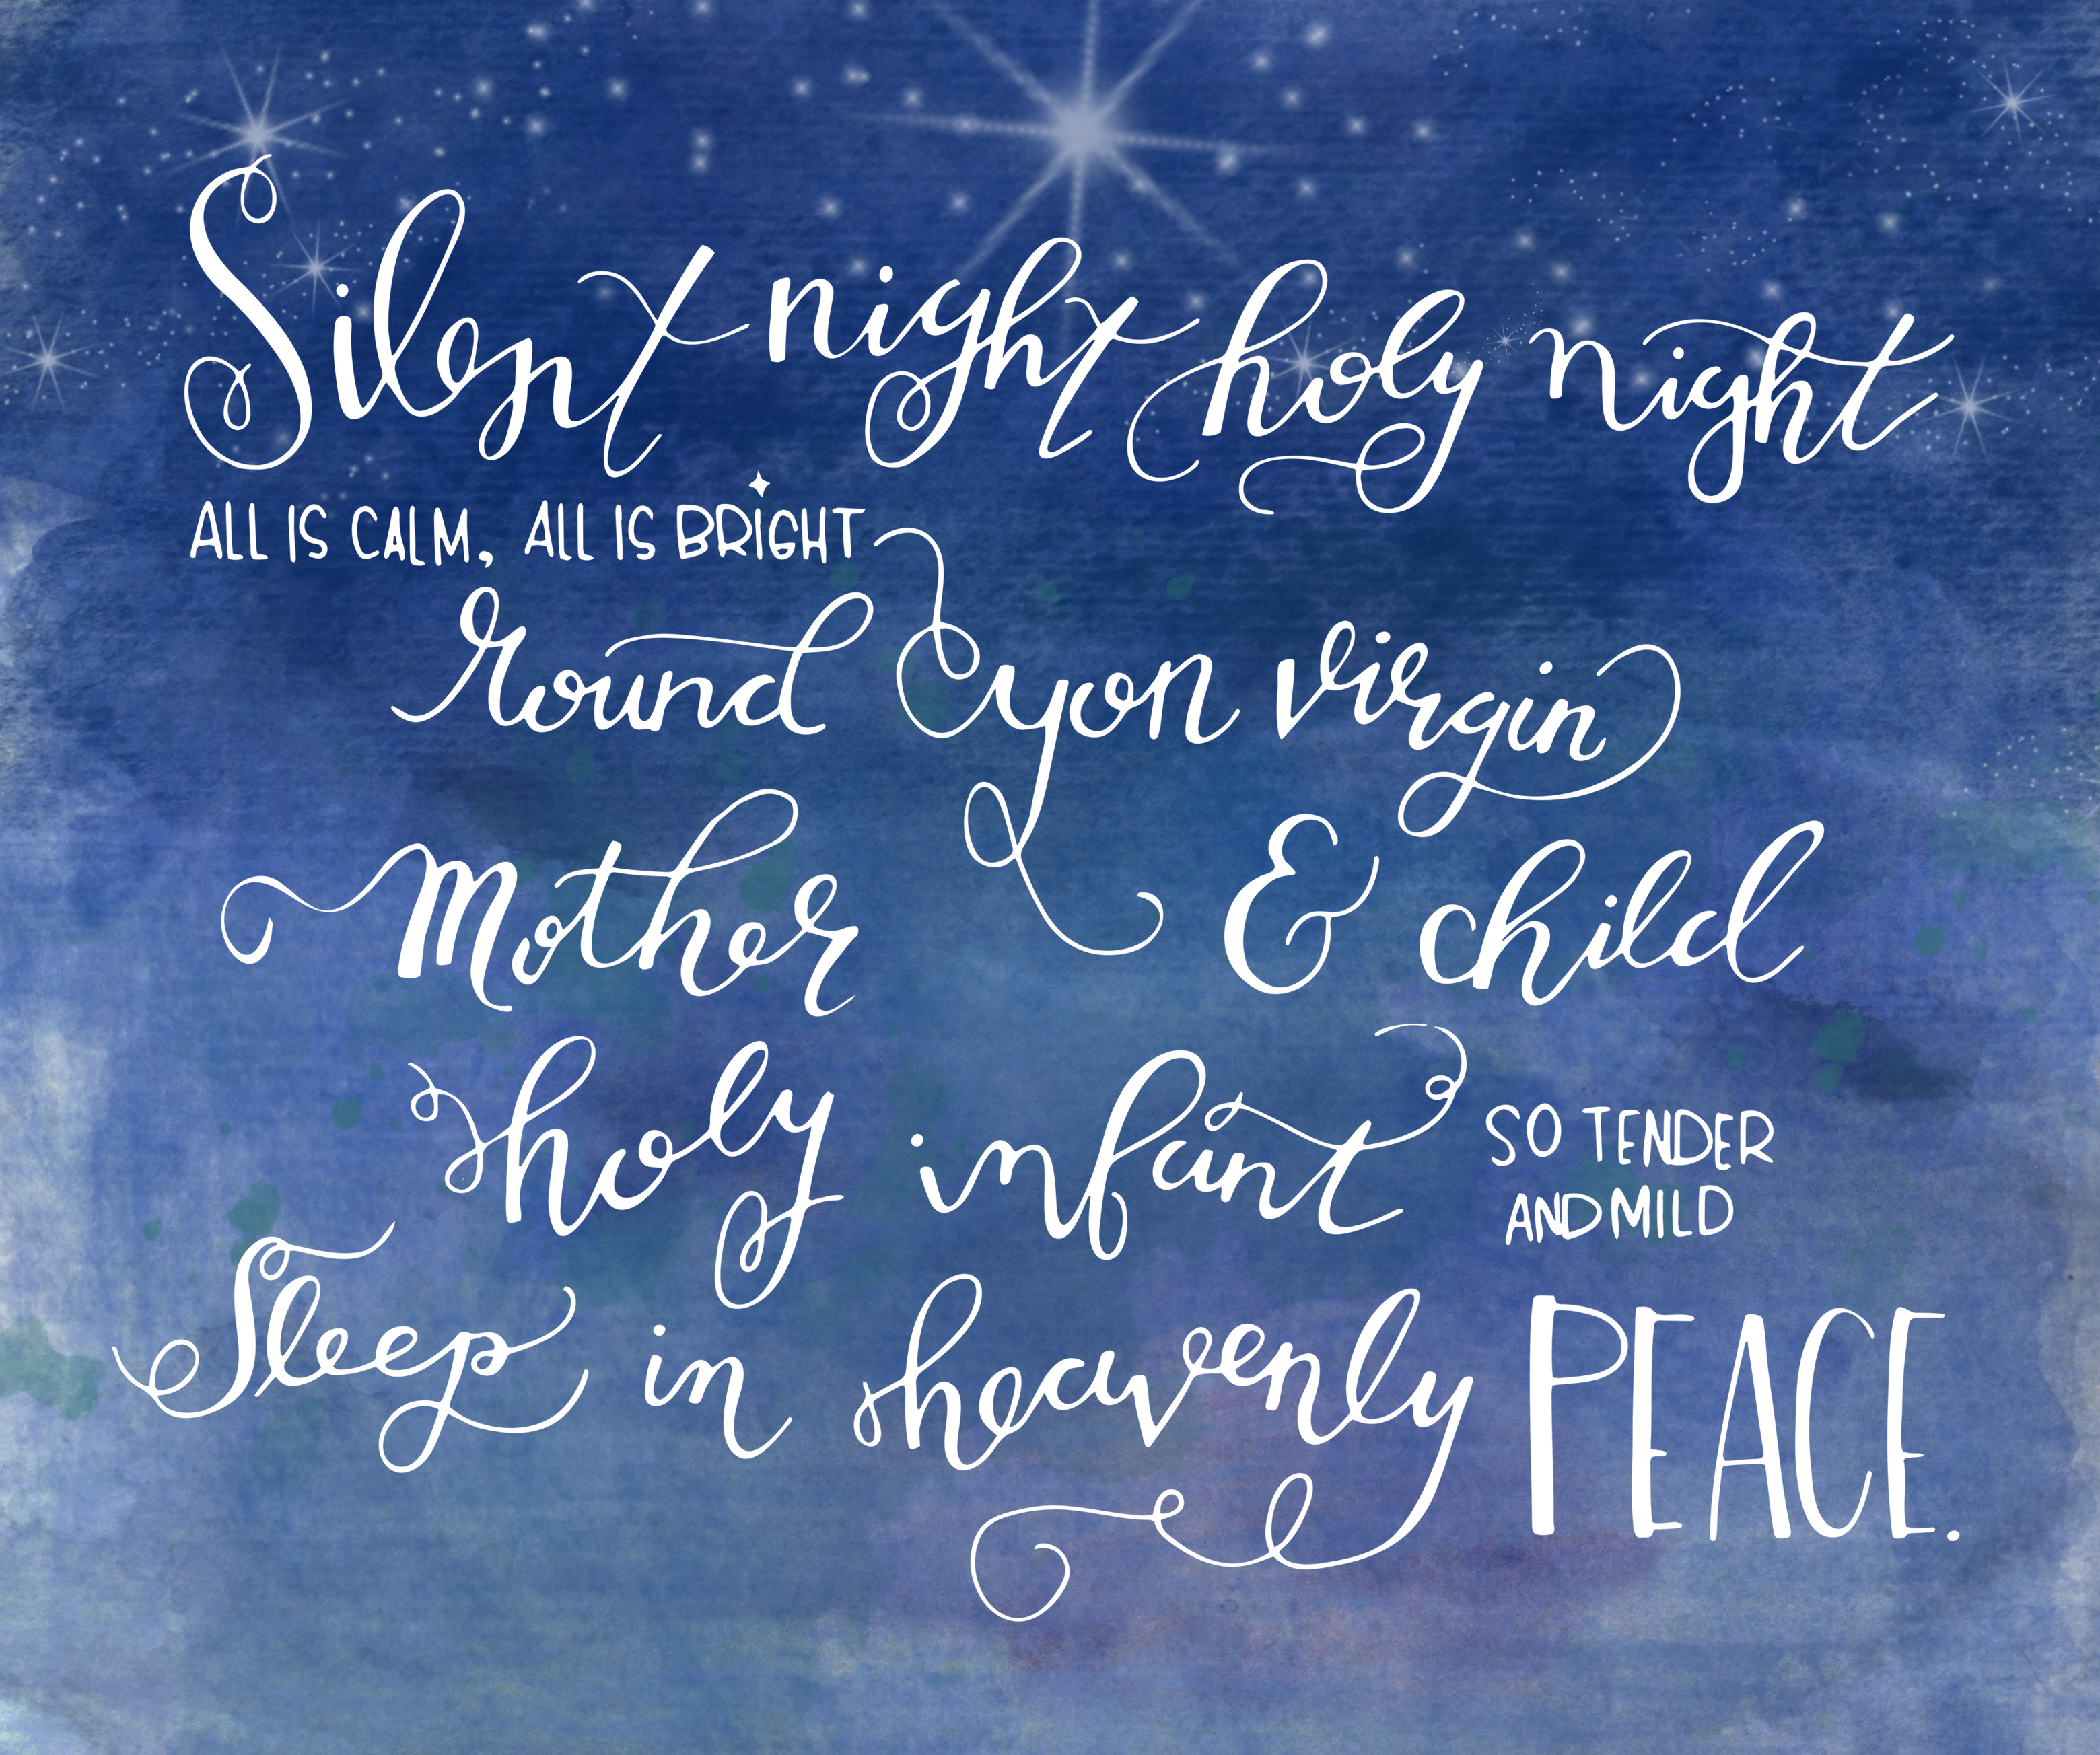 Nice Images Collection: Silent Night Desktop Wallpapers